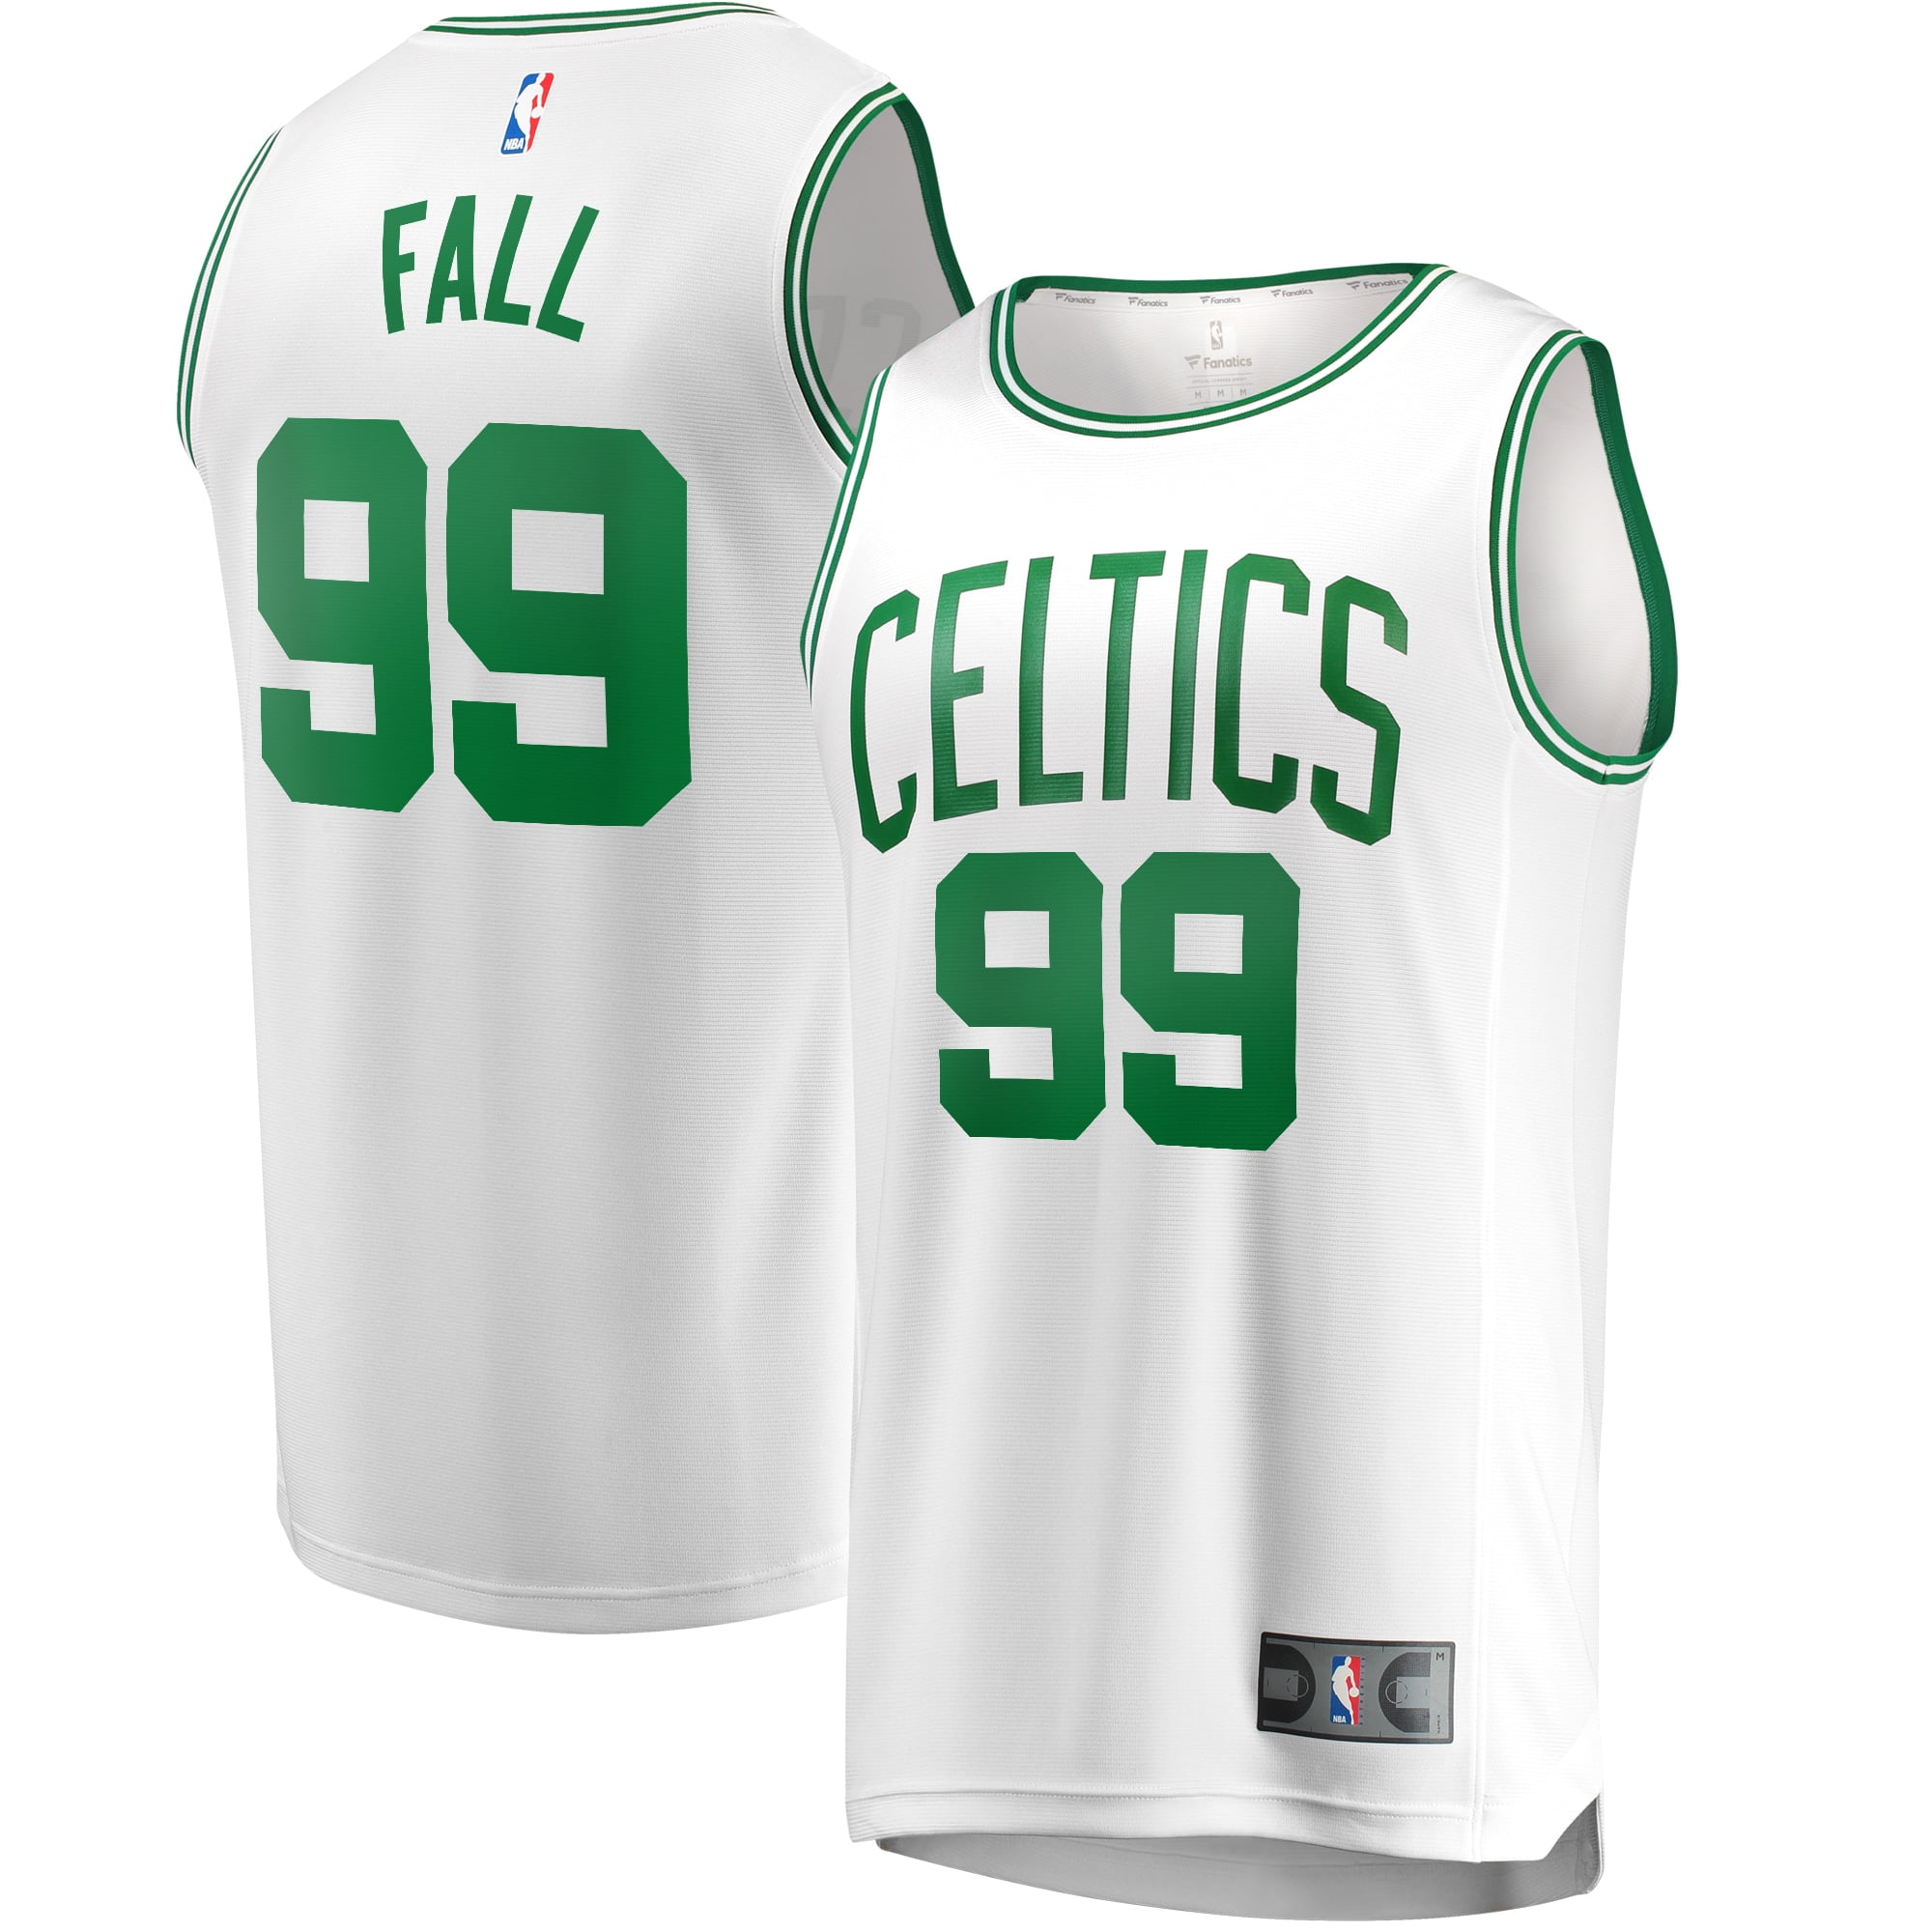 tacko fall jersey number